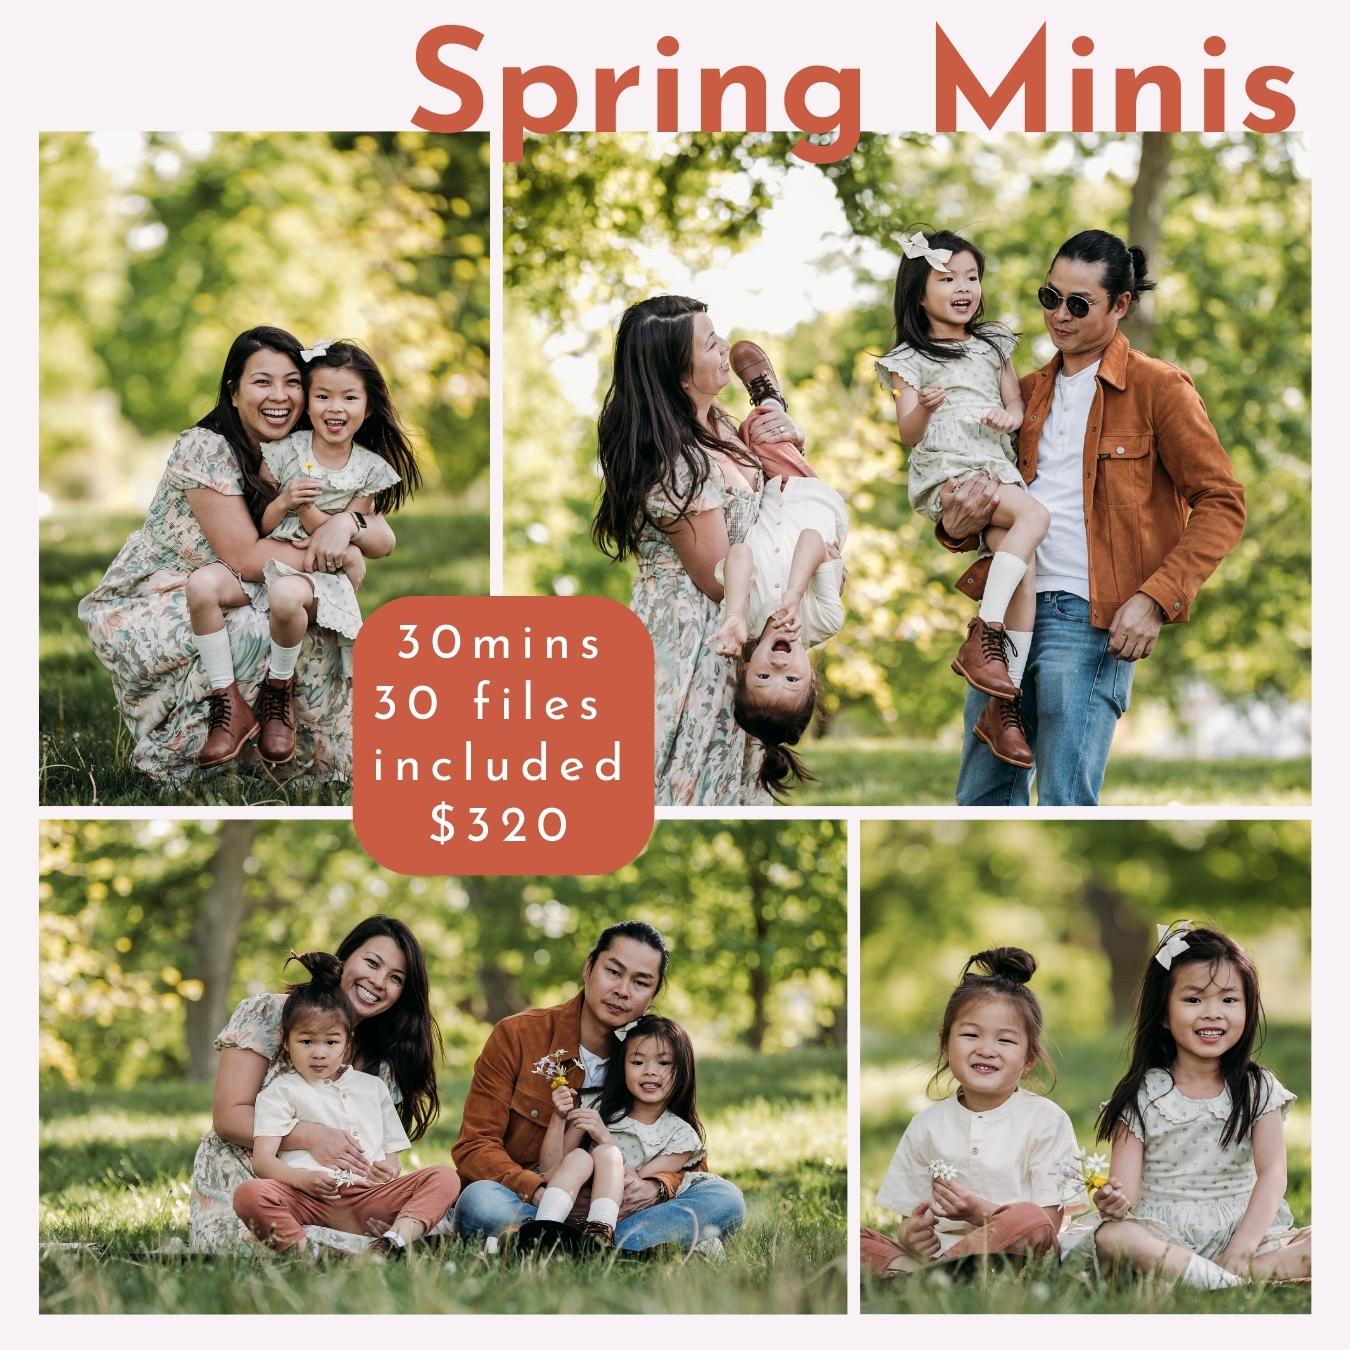 flyer for spring minis with four photos of a family of four, daughter sitting in mothers lap in the grass both smiling at the camera, mother is holding daughter upside down and father is holding daughter in front of green trees, mother and father sitting with their two daughters in the green grass, two girls sitting in the grass smiling at the camera; the flyer is captioned "30 mins, 30 files included, $320"